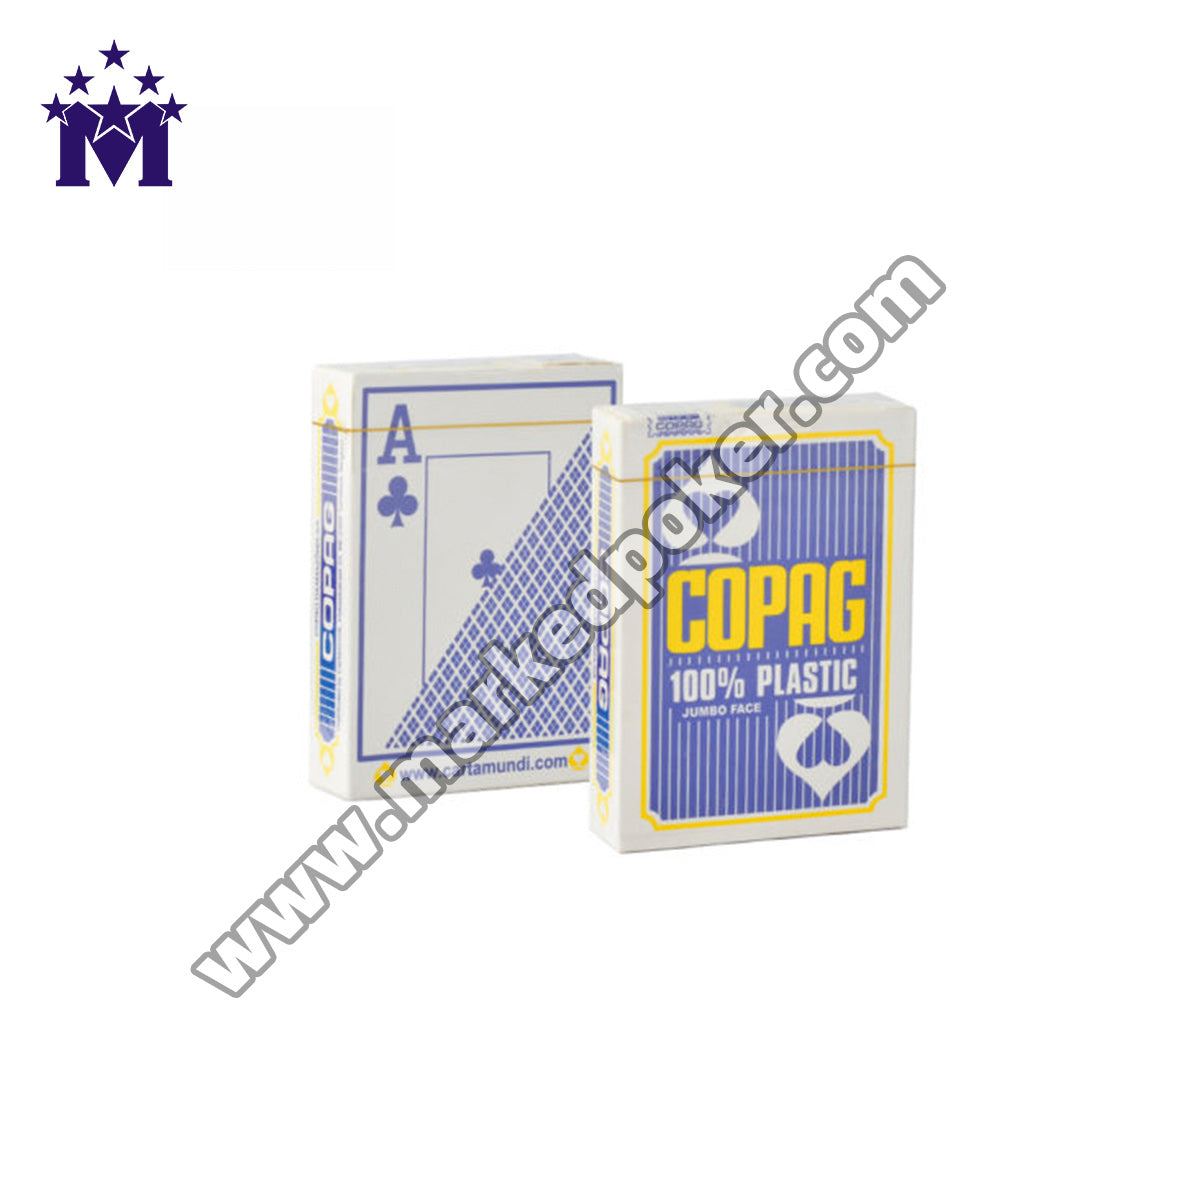 Copag Jumbo Face Barcode Playing Cards For Poker Cheating Analyzer